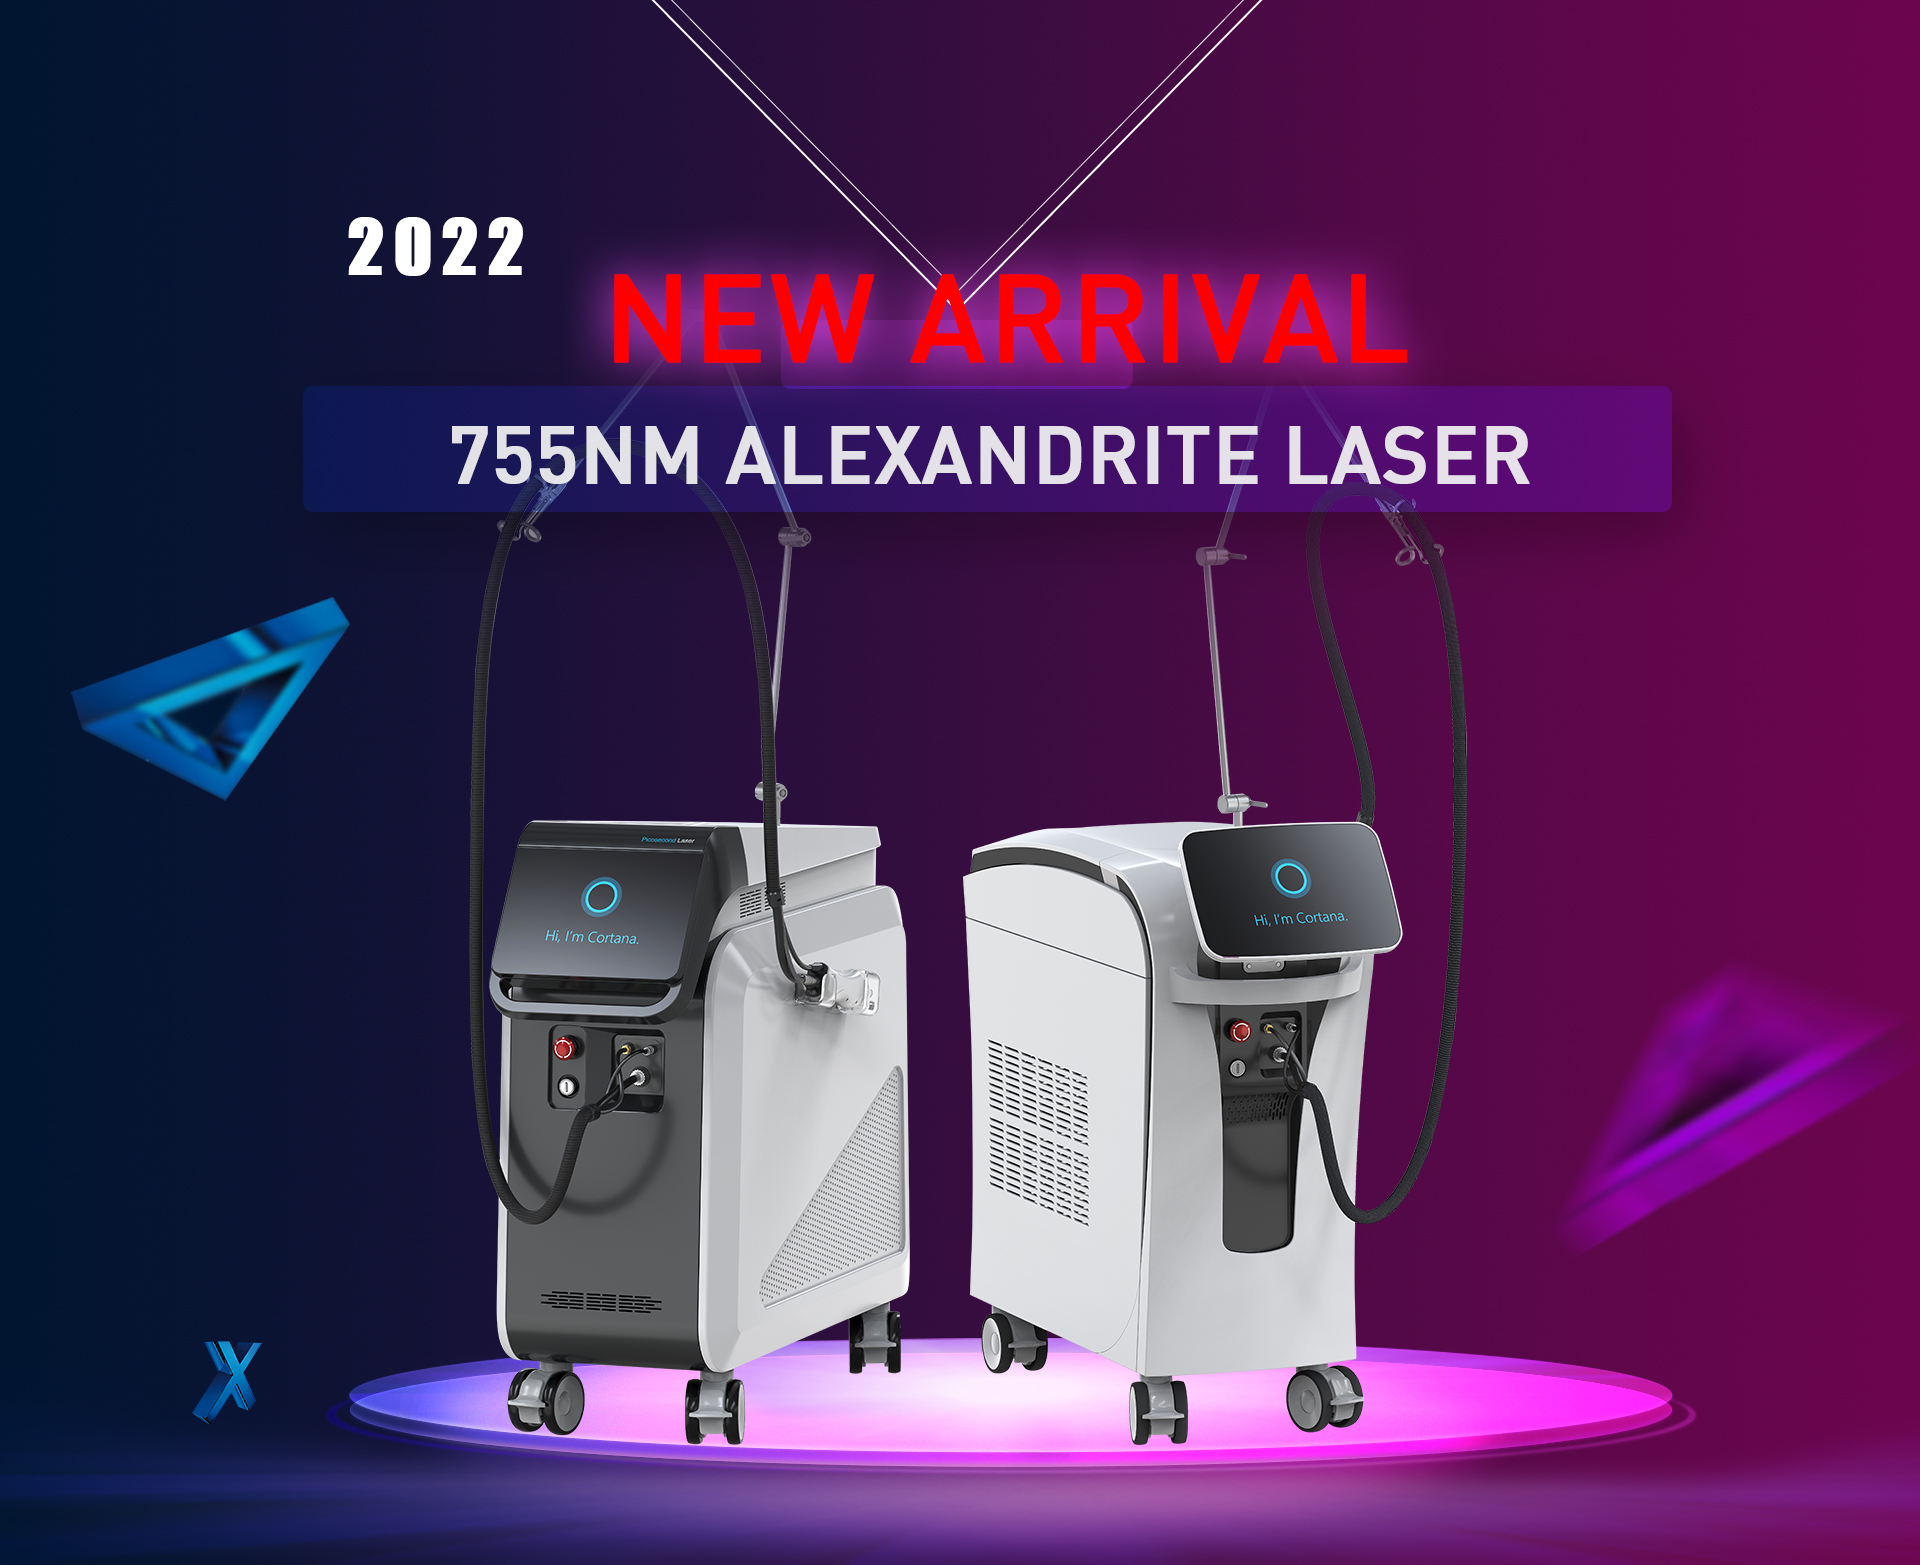 Two kinds of New 755nm Alexandrite laser machine released in market